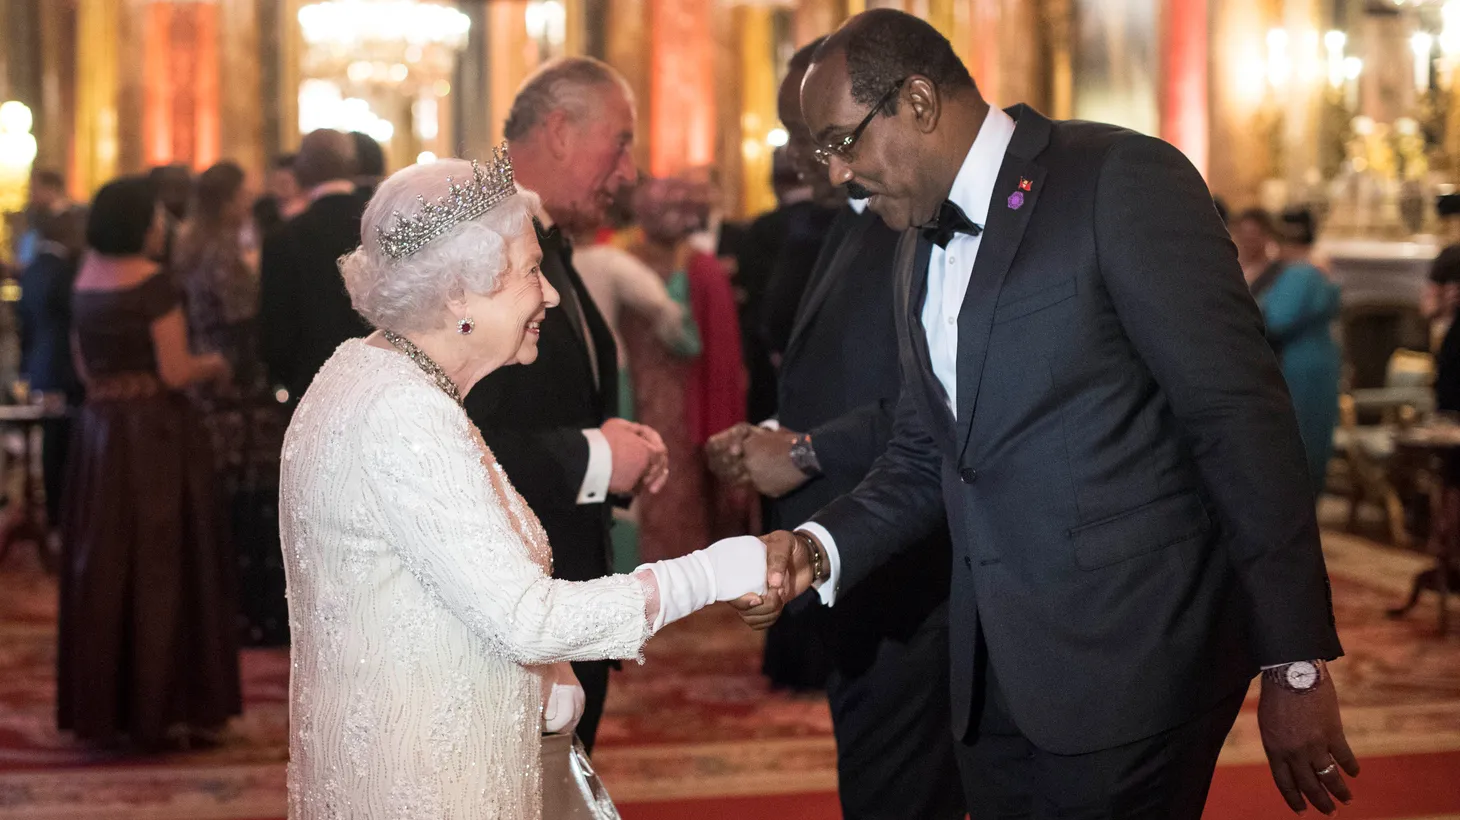 Queen Elizabeth II greets Gaston Browne, Prime Minister of Antigua and Barbuda, in the Blue Drawing Room at Buckingham Palace in London as she hosts a dinner during the Commonwealth Heads of Government Meeting on April 19, 2018.